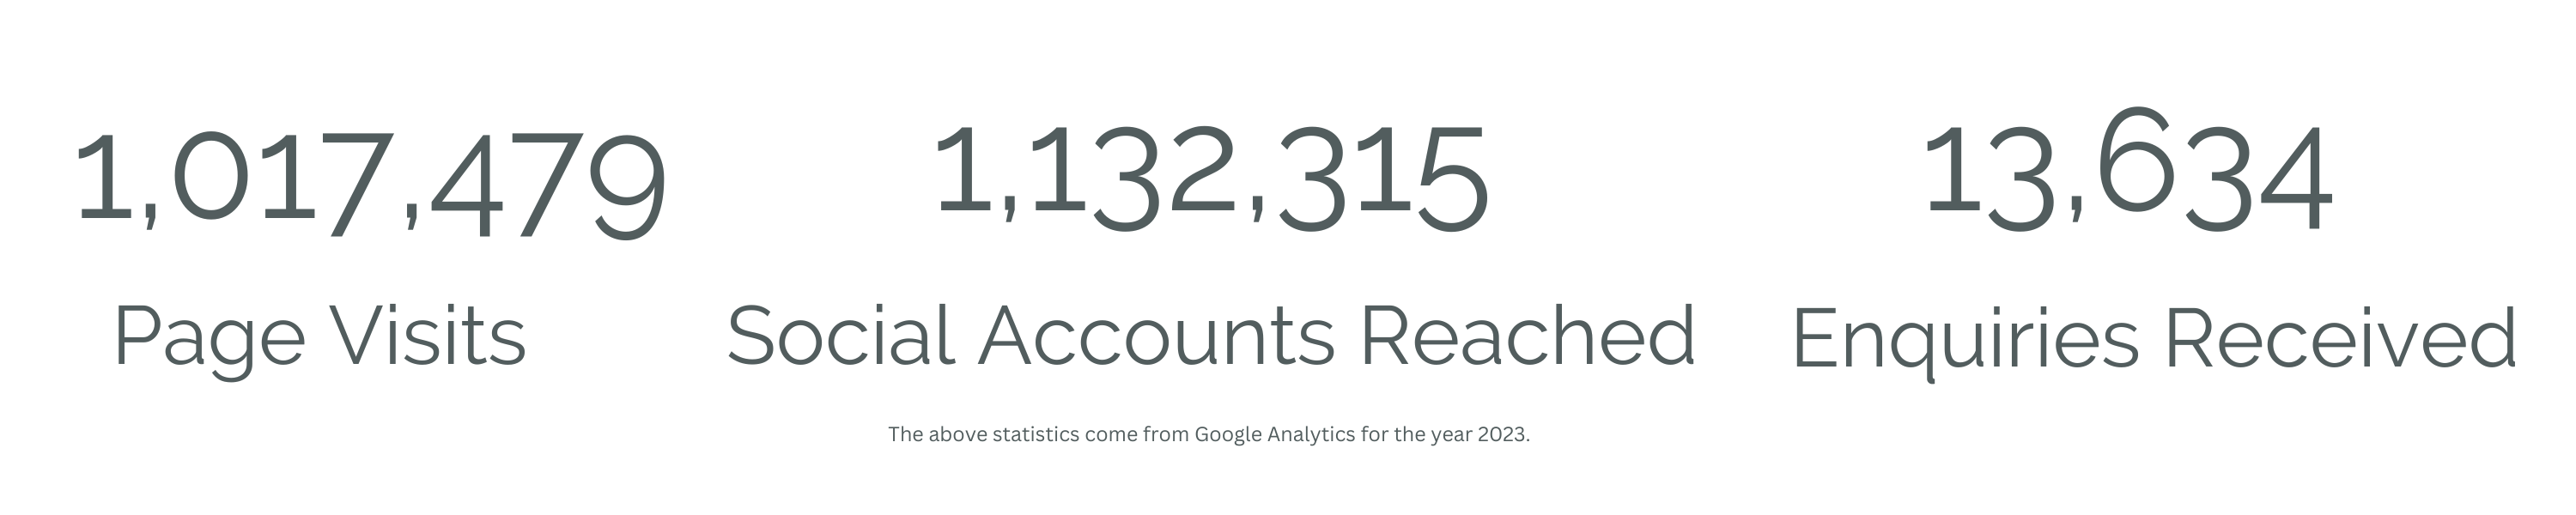 The above statistics come from Google Analytics for the year 2023.